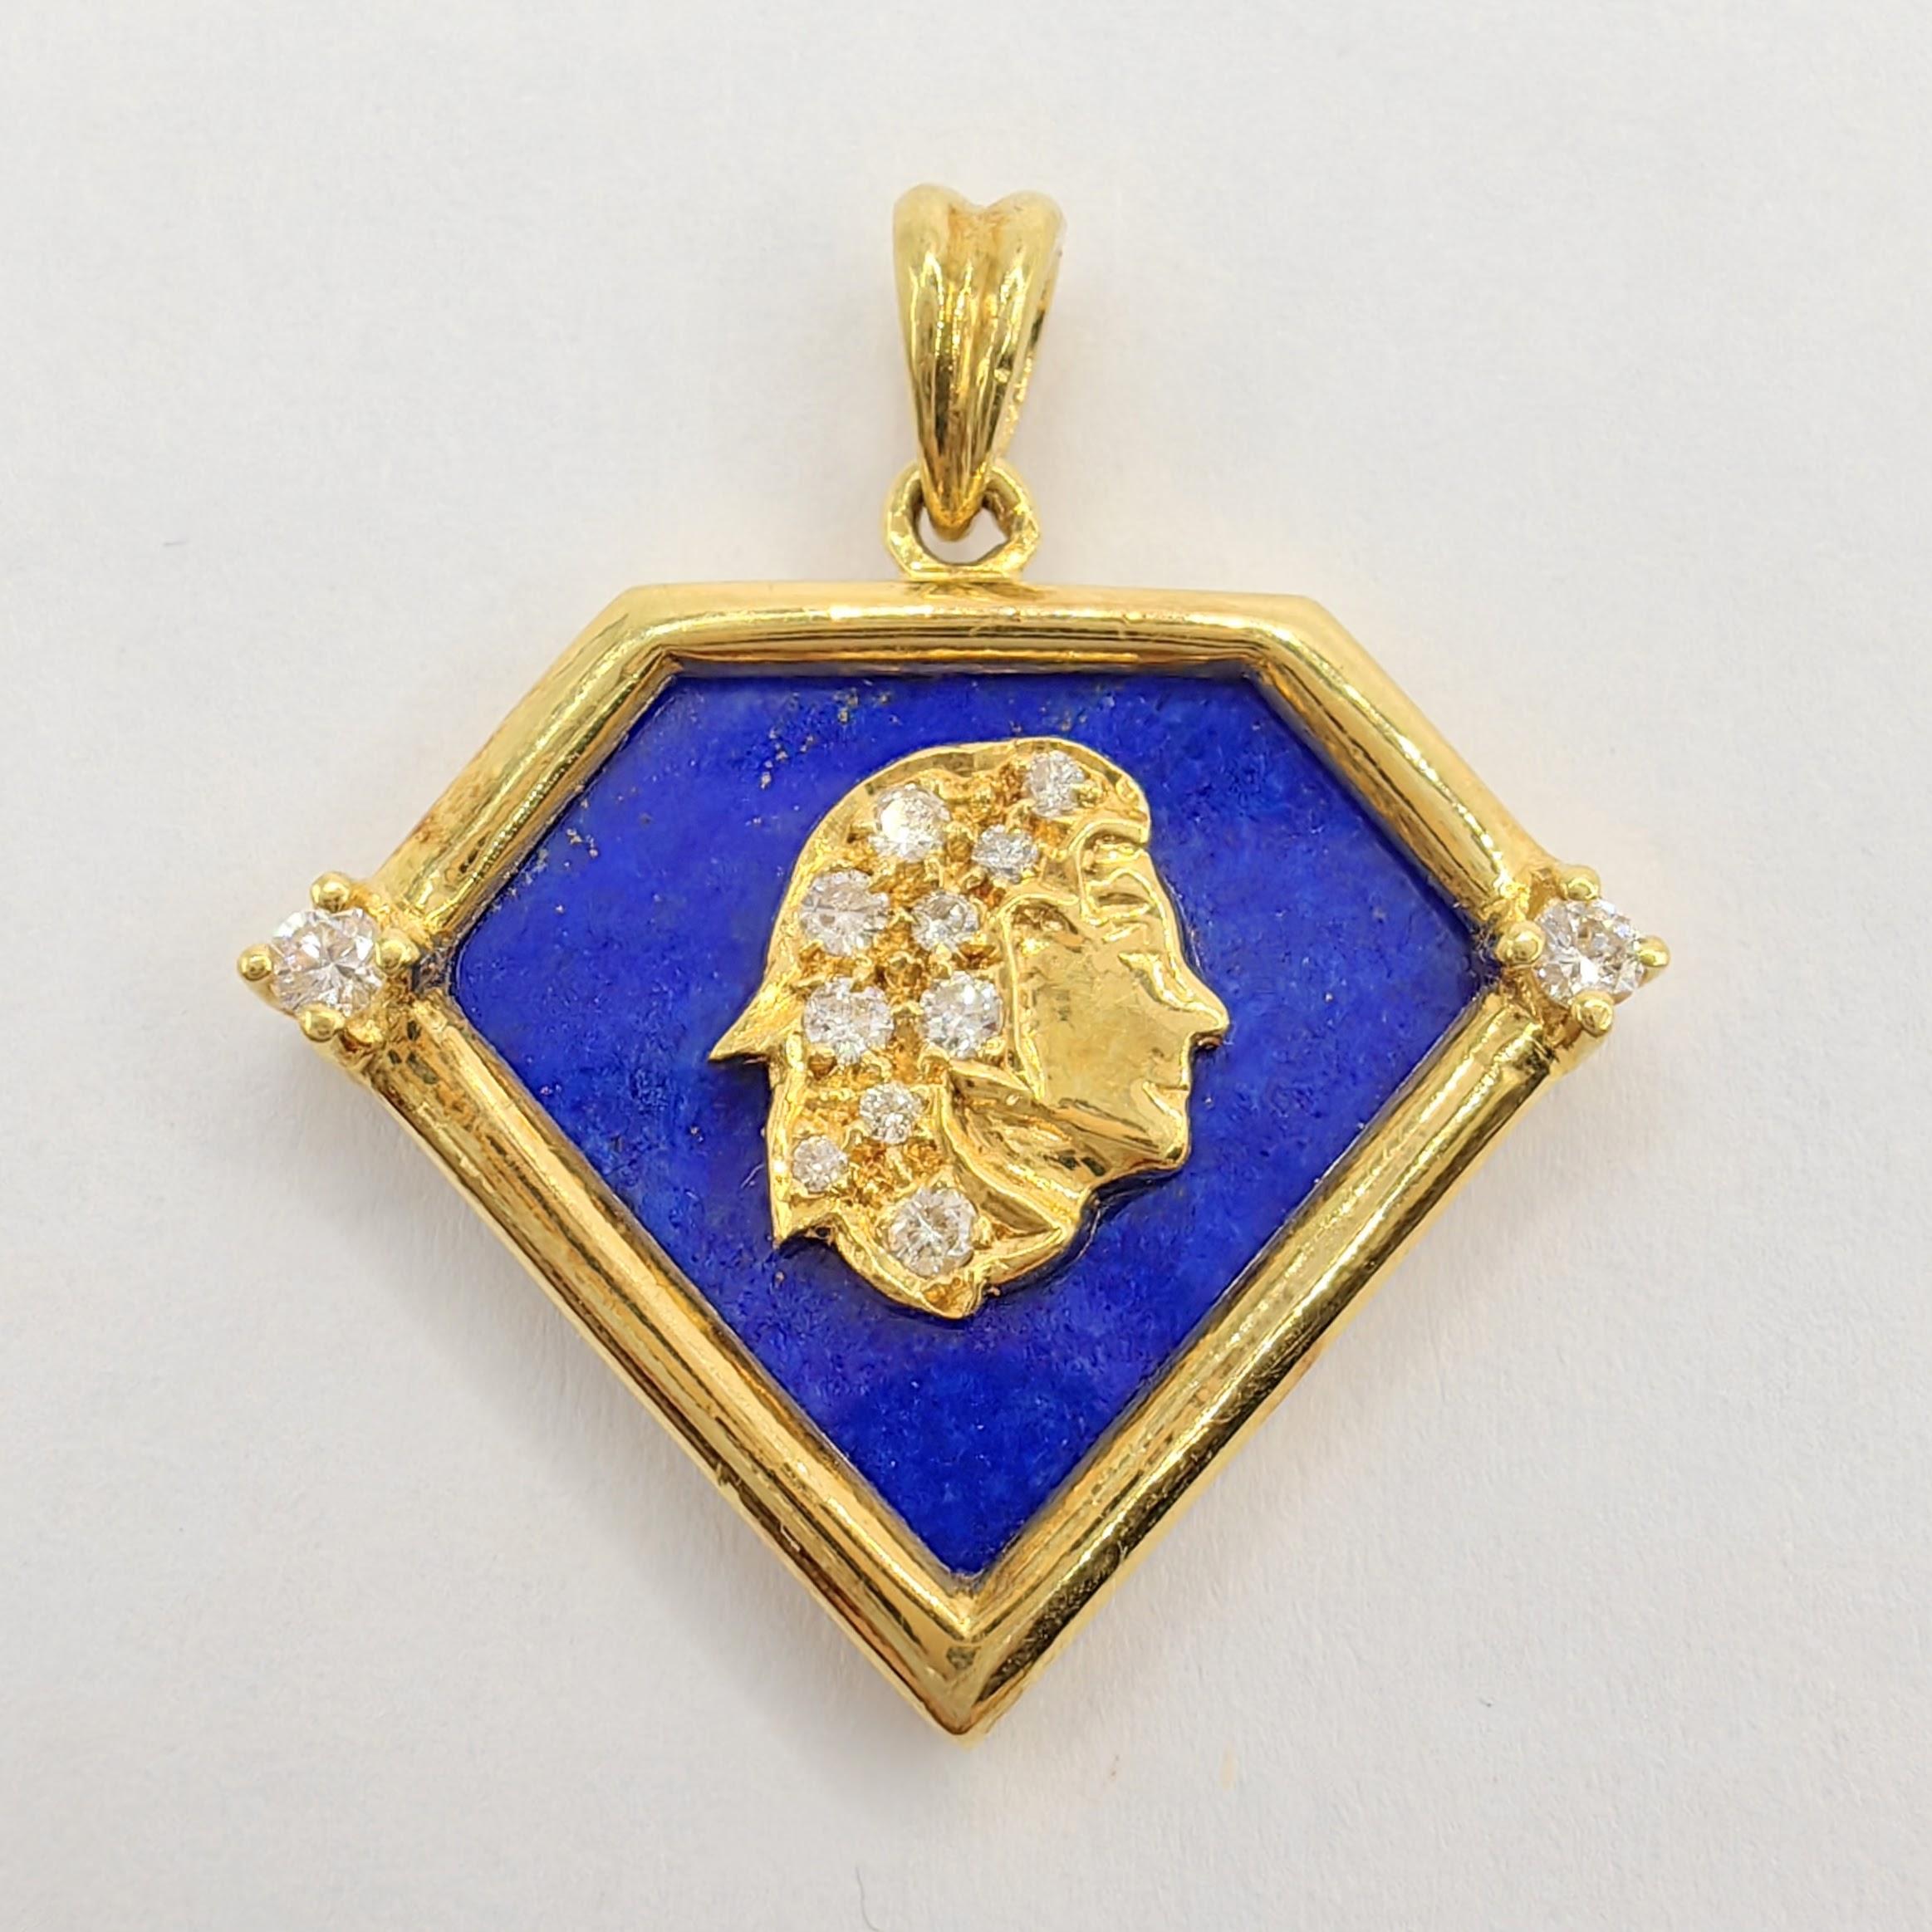 Introducing the Vintage 90's Virgo Blue Lapis Diamond Necklace Pendant in 20K Yellow Gold. This pendant is a true embodiment of celestial beauty and timeless elegance.

At the heart of this pendant lies a beautifully crafted Virgo zodiac motif in